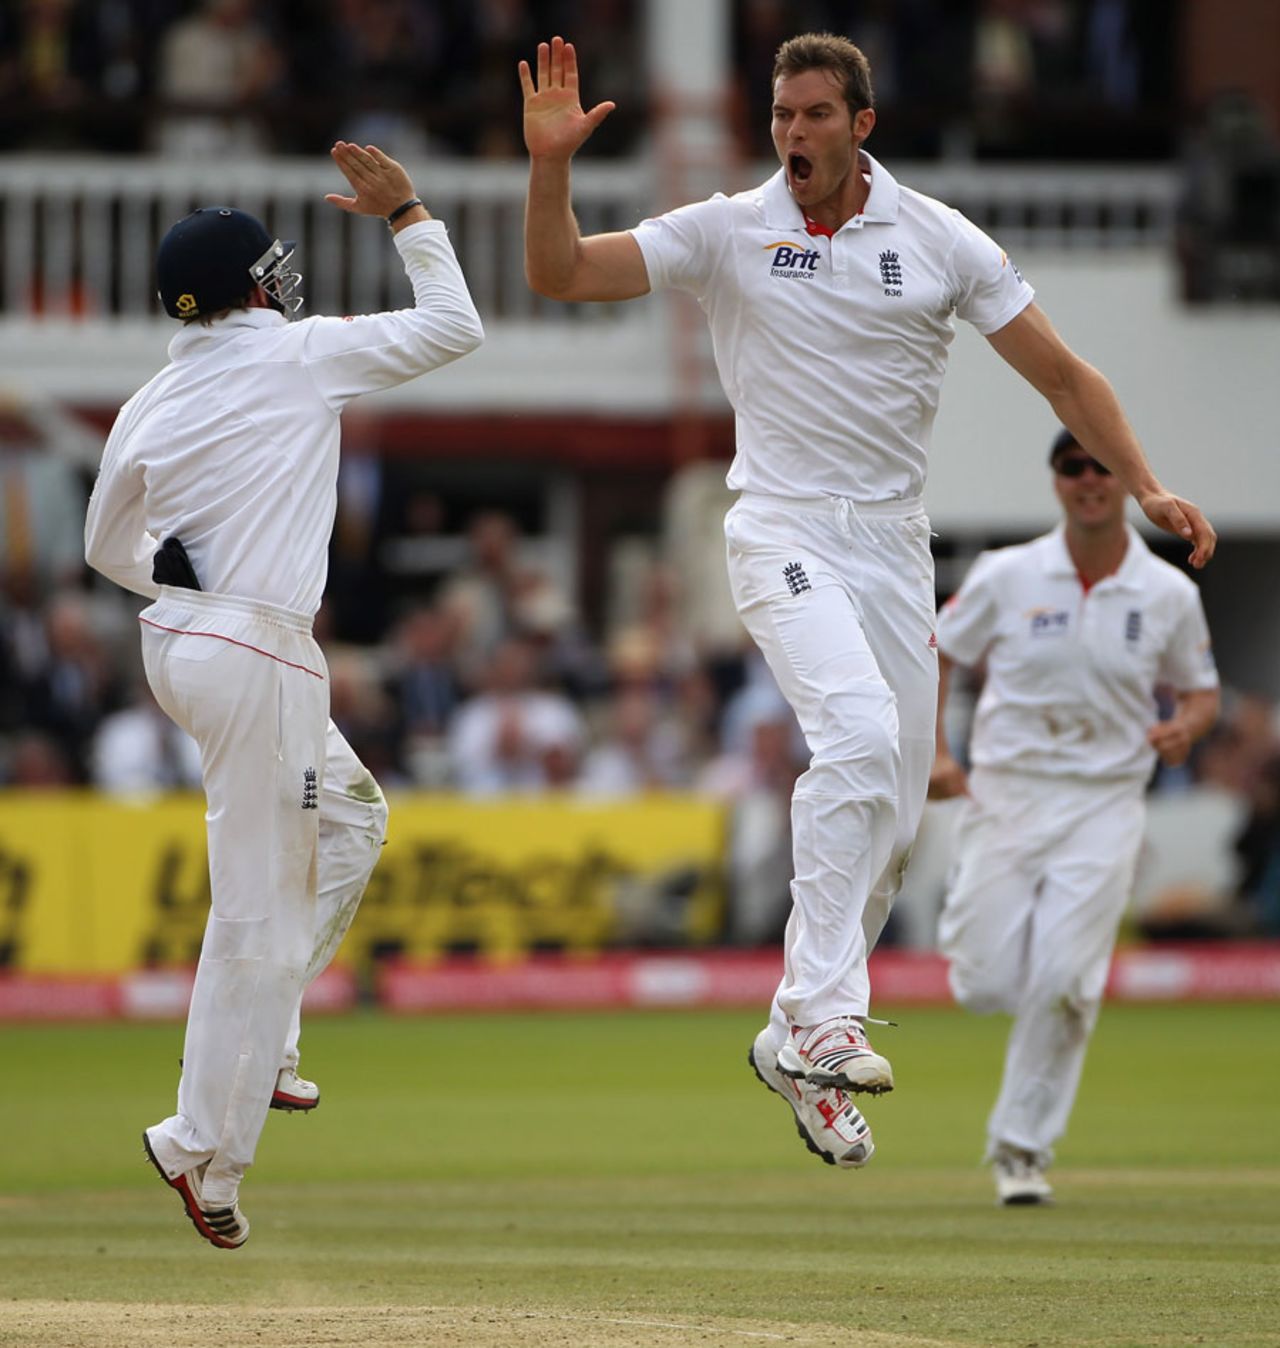 Chris Tremlett celebrates after removing MS Dhoni, England v India, 1st Test, Lord's, 5th day, July 25, 2011